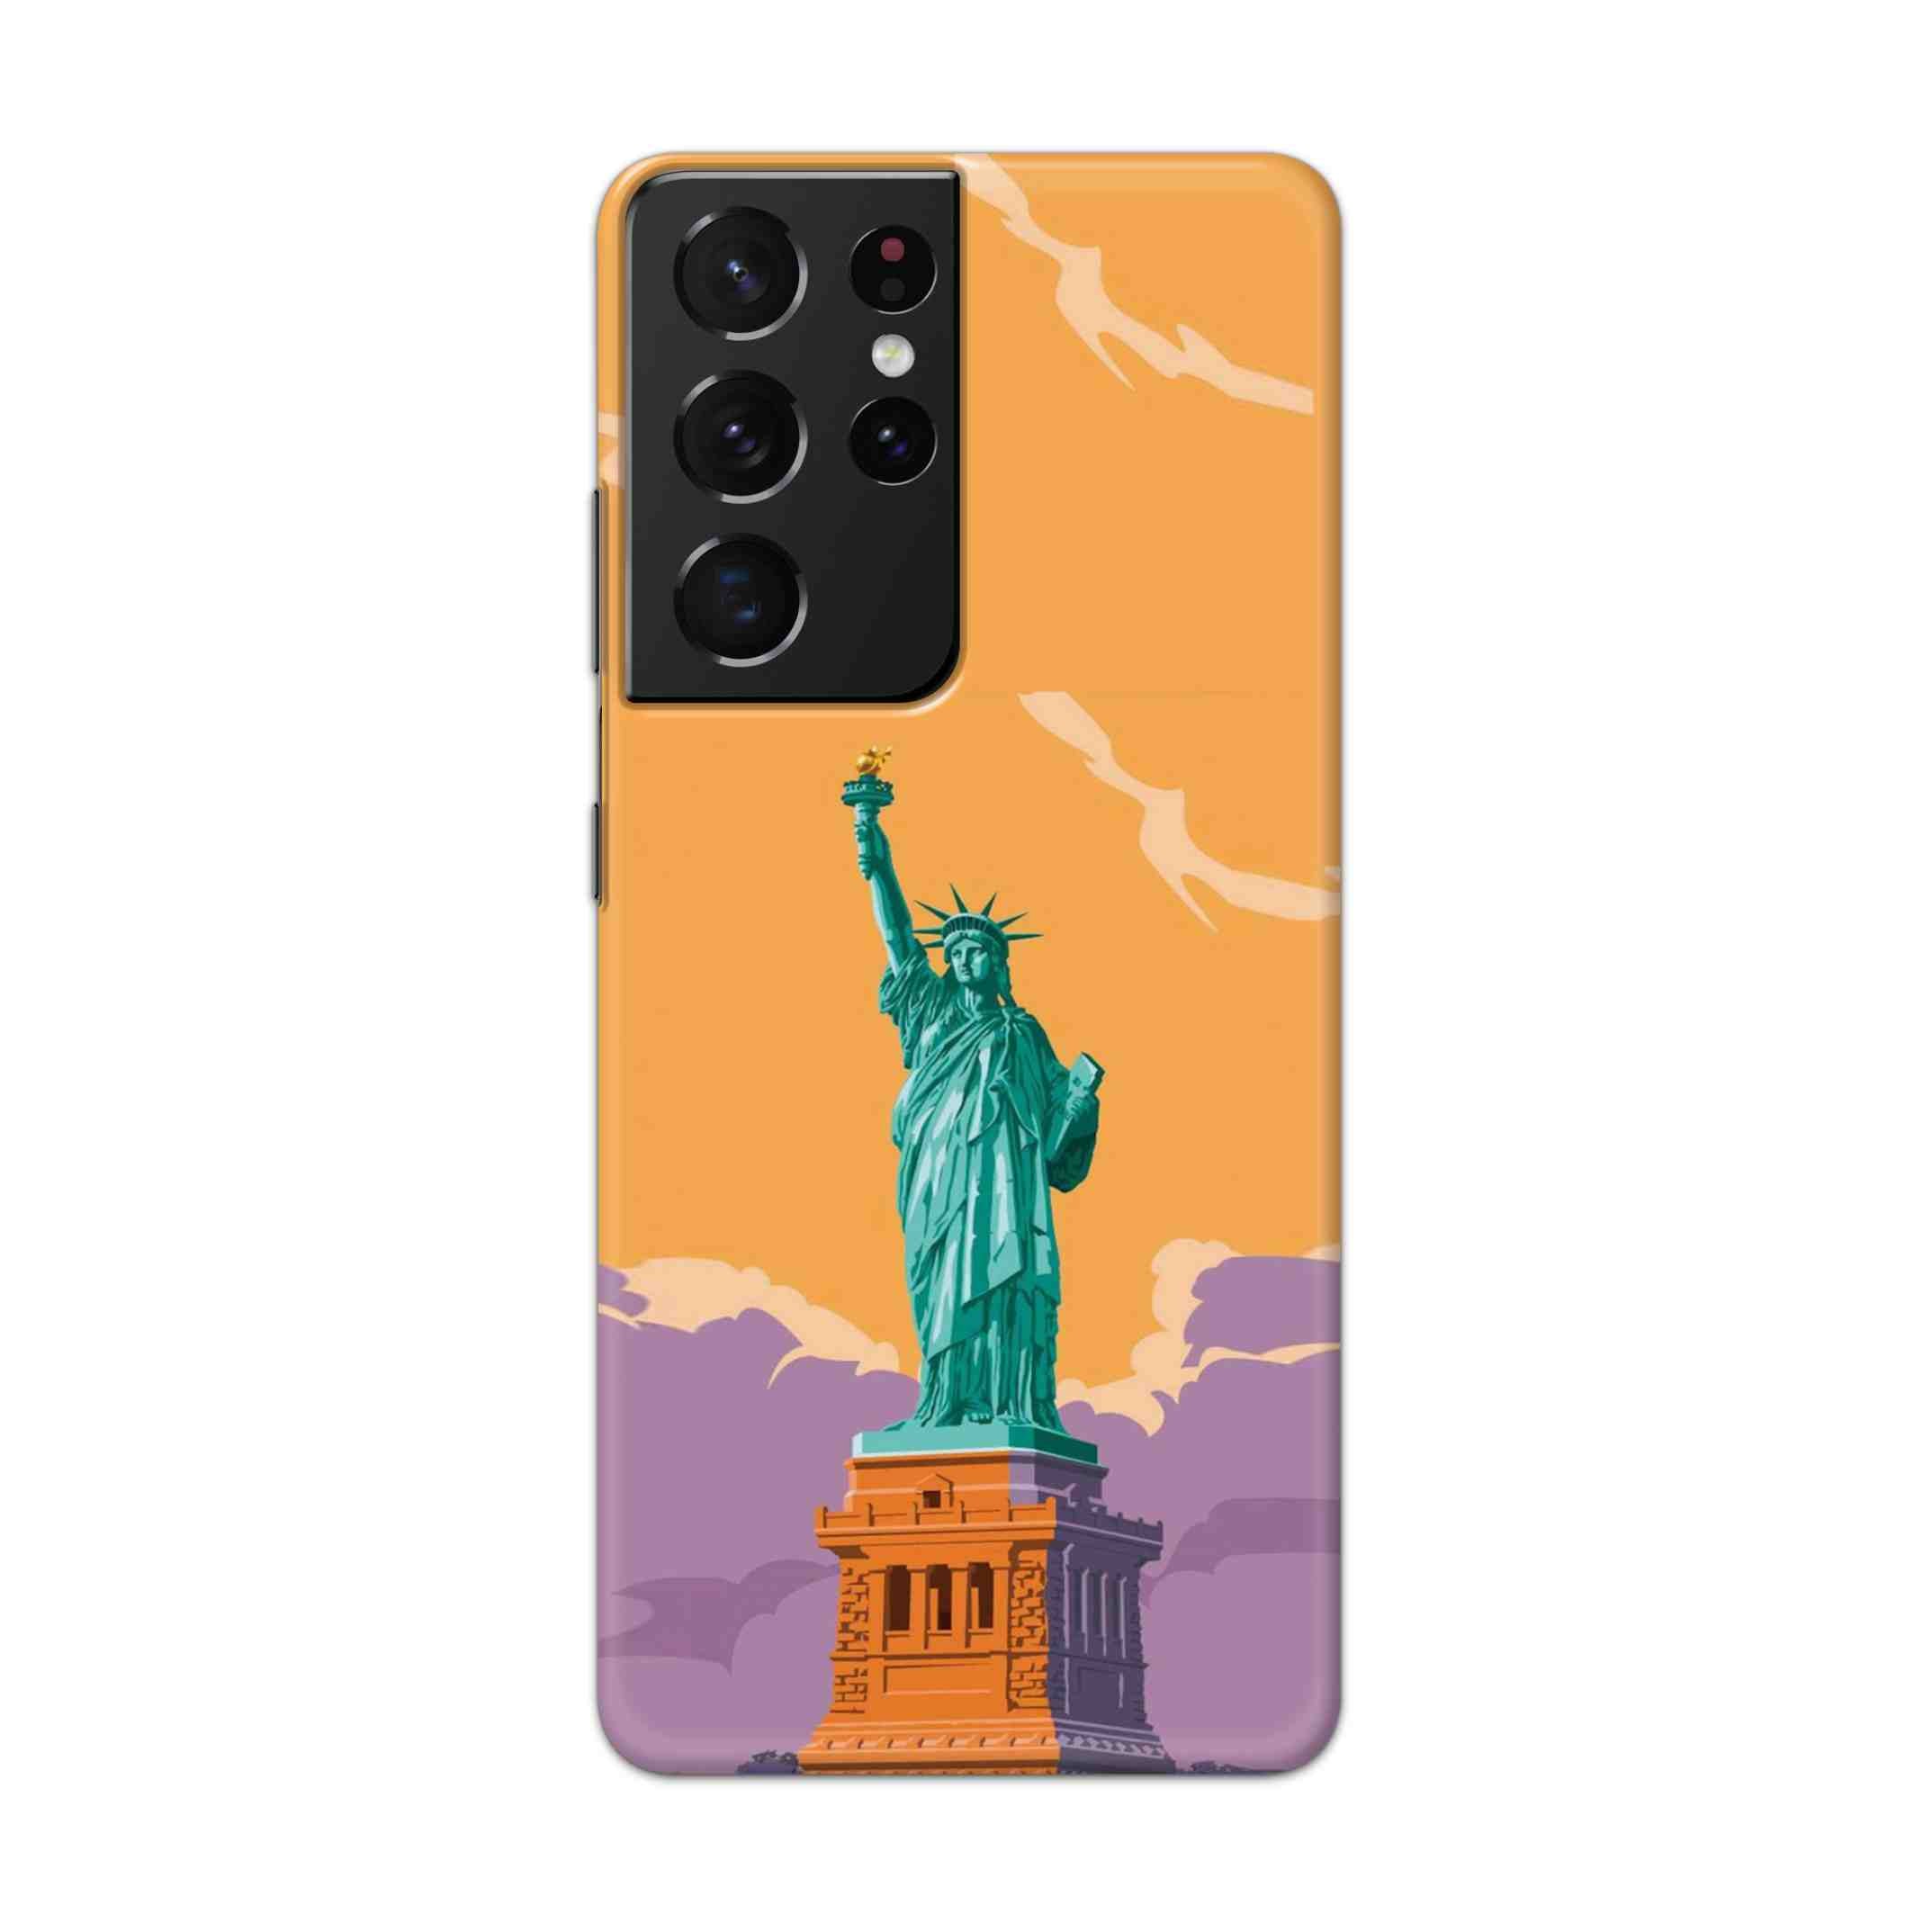 Buy Statue Of Liberty Hard Back Mobile Phone Case Cover For Samsung Galaxy S21 Ultra Online